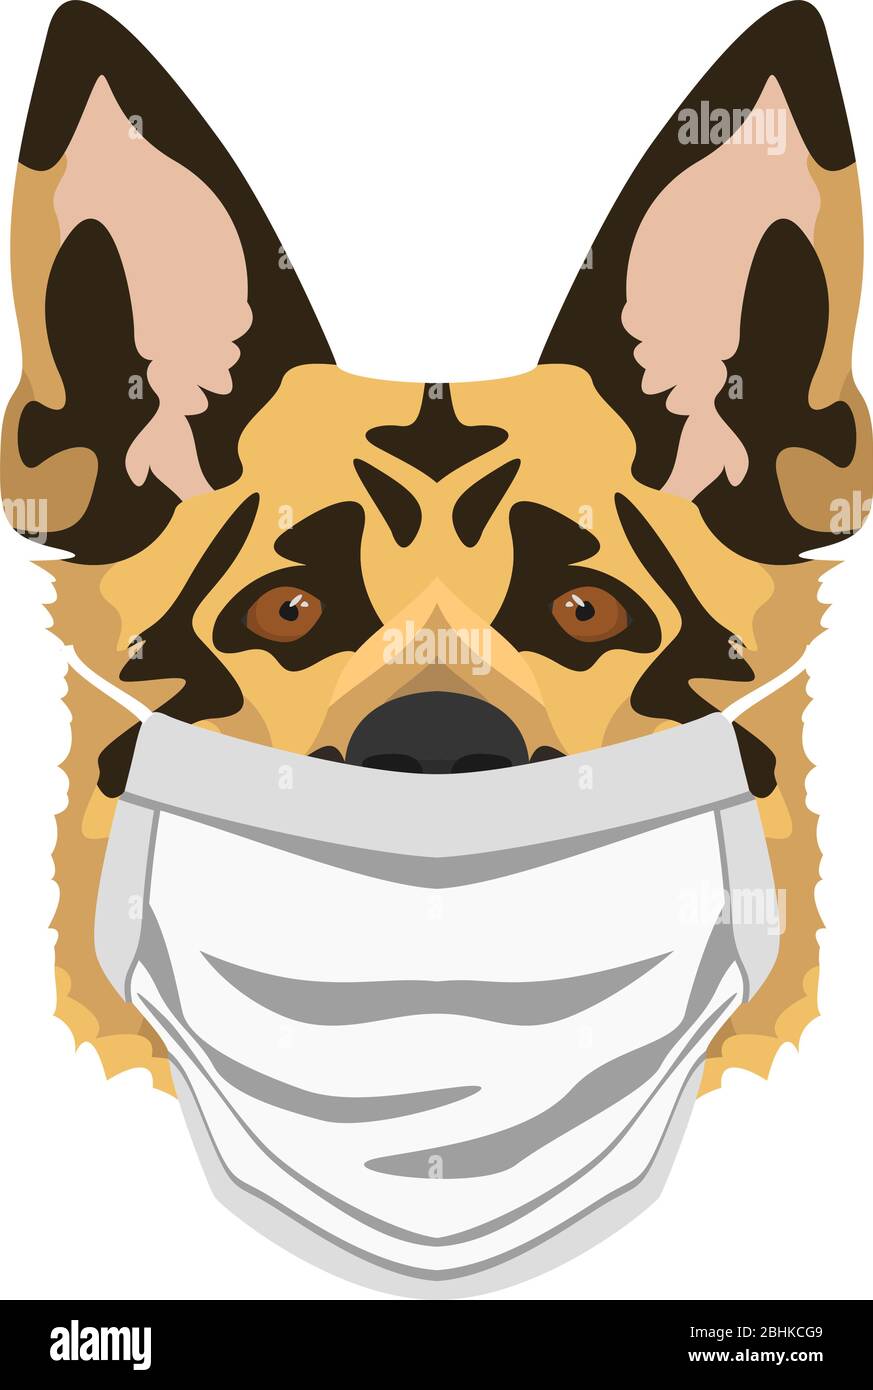 Illustration of a german shepherd with respirator. At this time of the pandemic, the design is a nice graphic for fans of dogs. Stock Vector